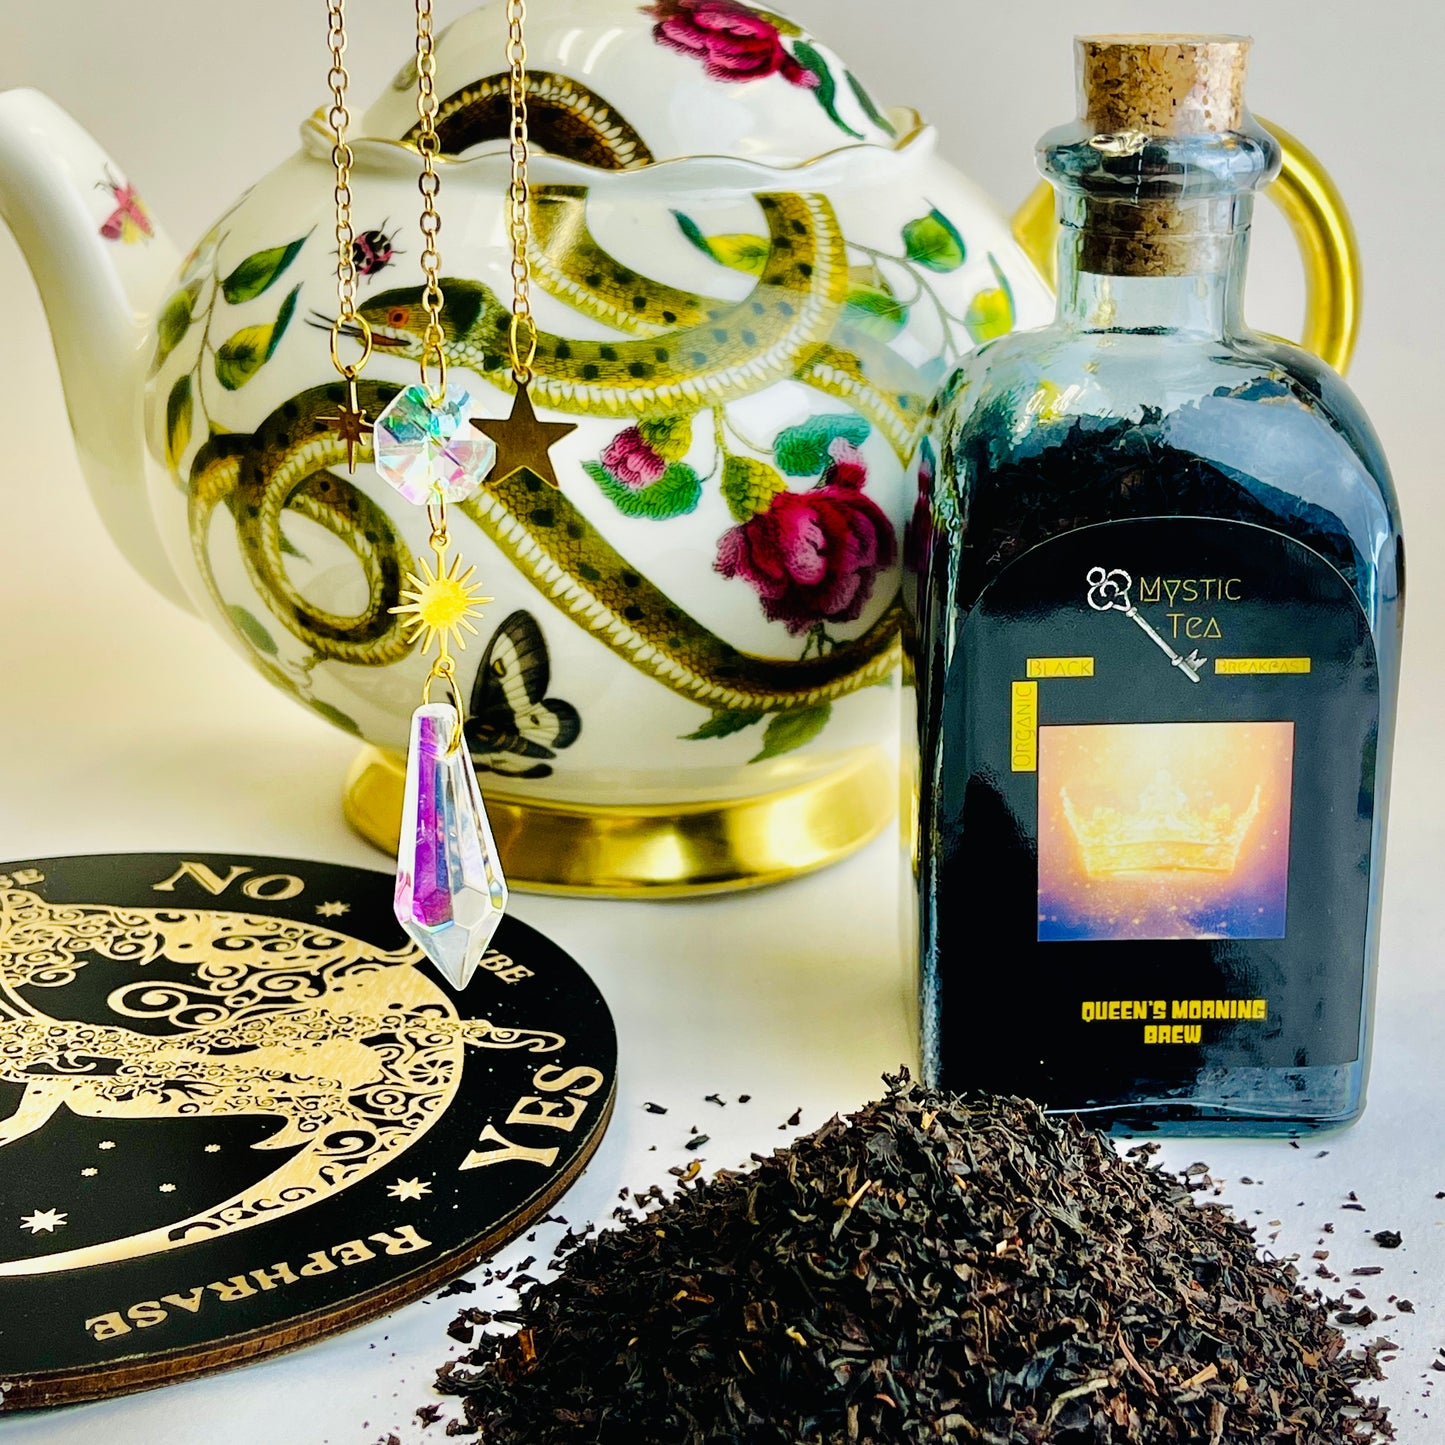 Queen’s Morning Brew Organic Tea in Black Glass Jar Cork Top Loose Leaf Sustainable Spell Intentional